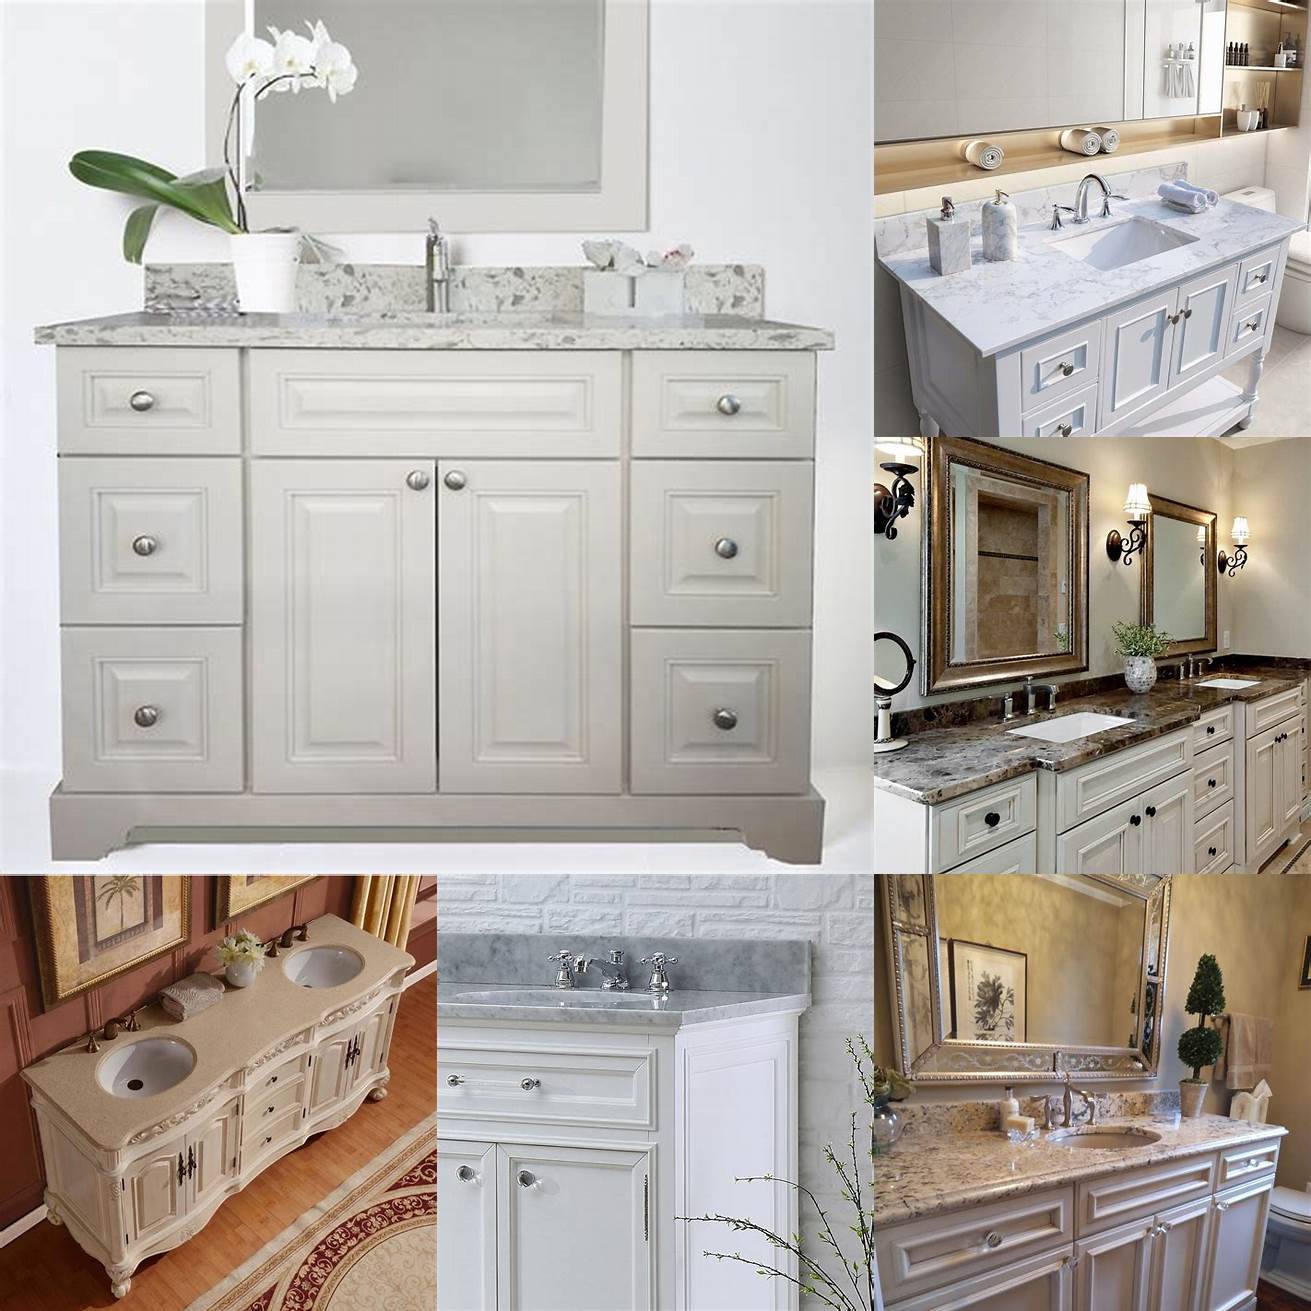 An antique white bathroom vanity with a marble countertop can add a touch of luxury to your bathroom